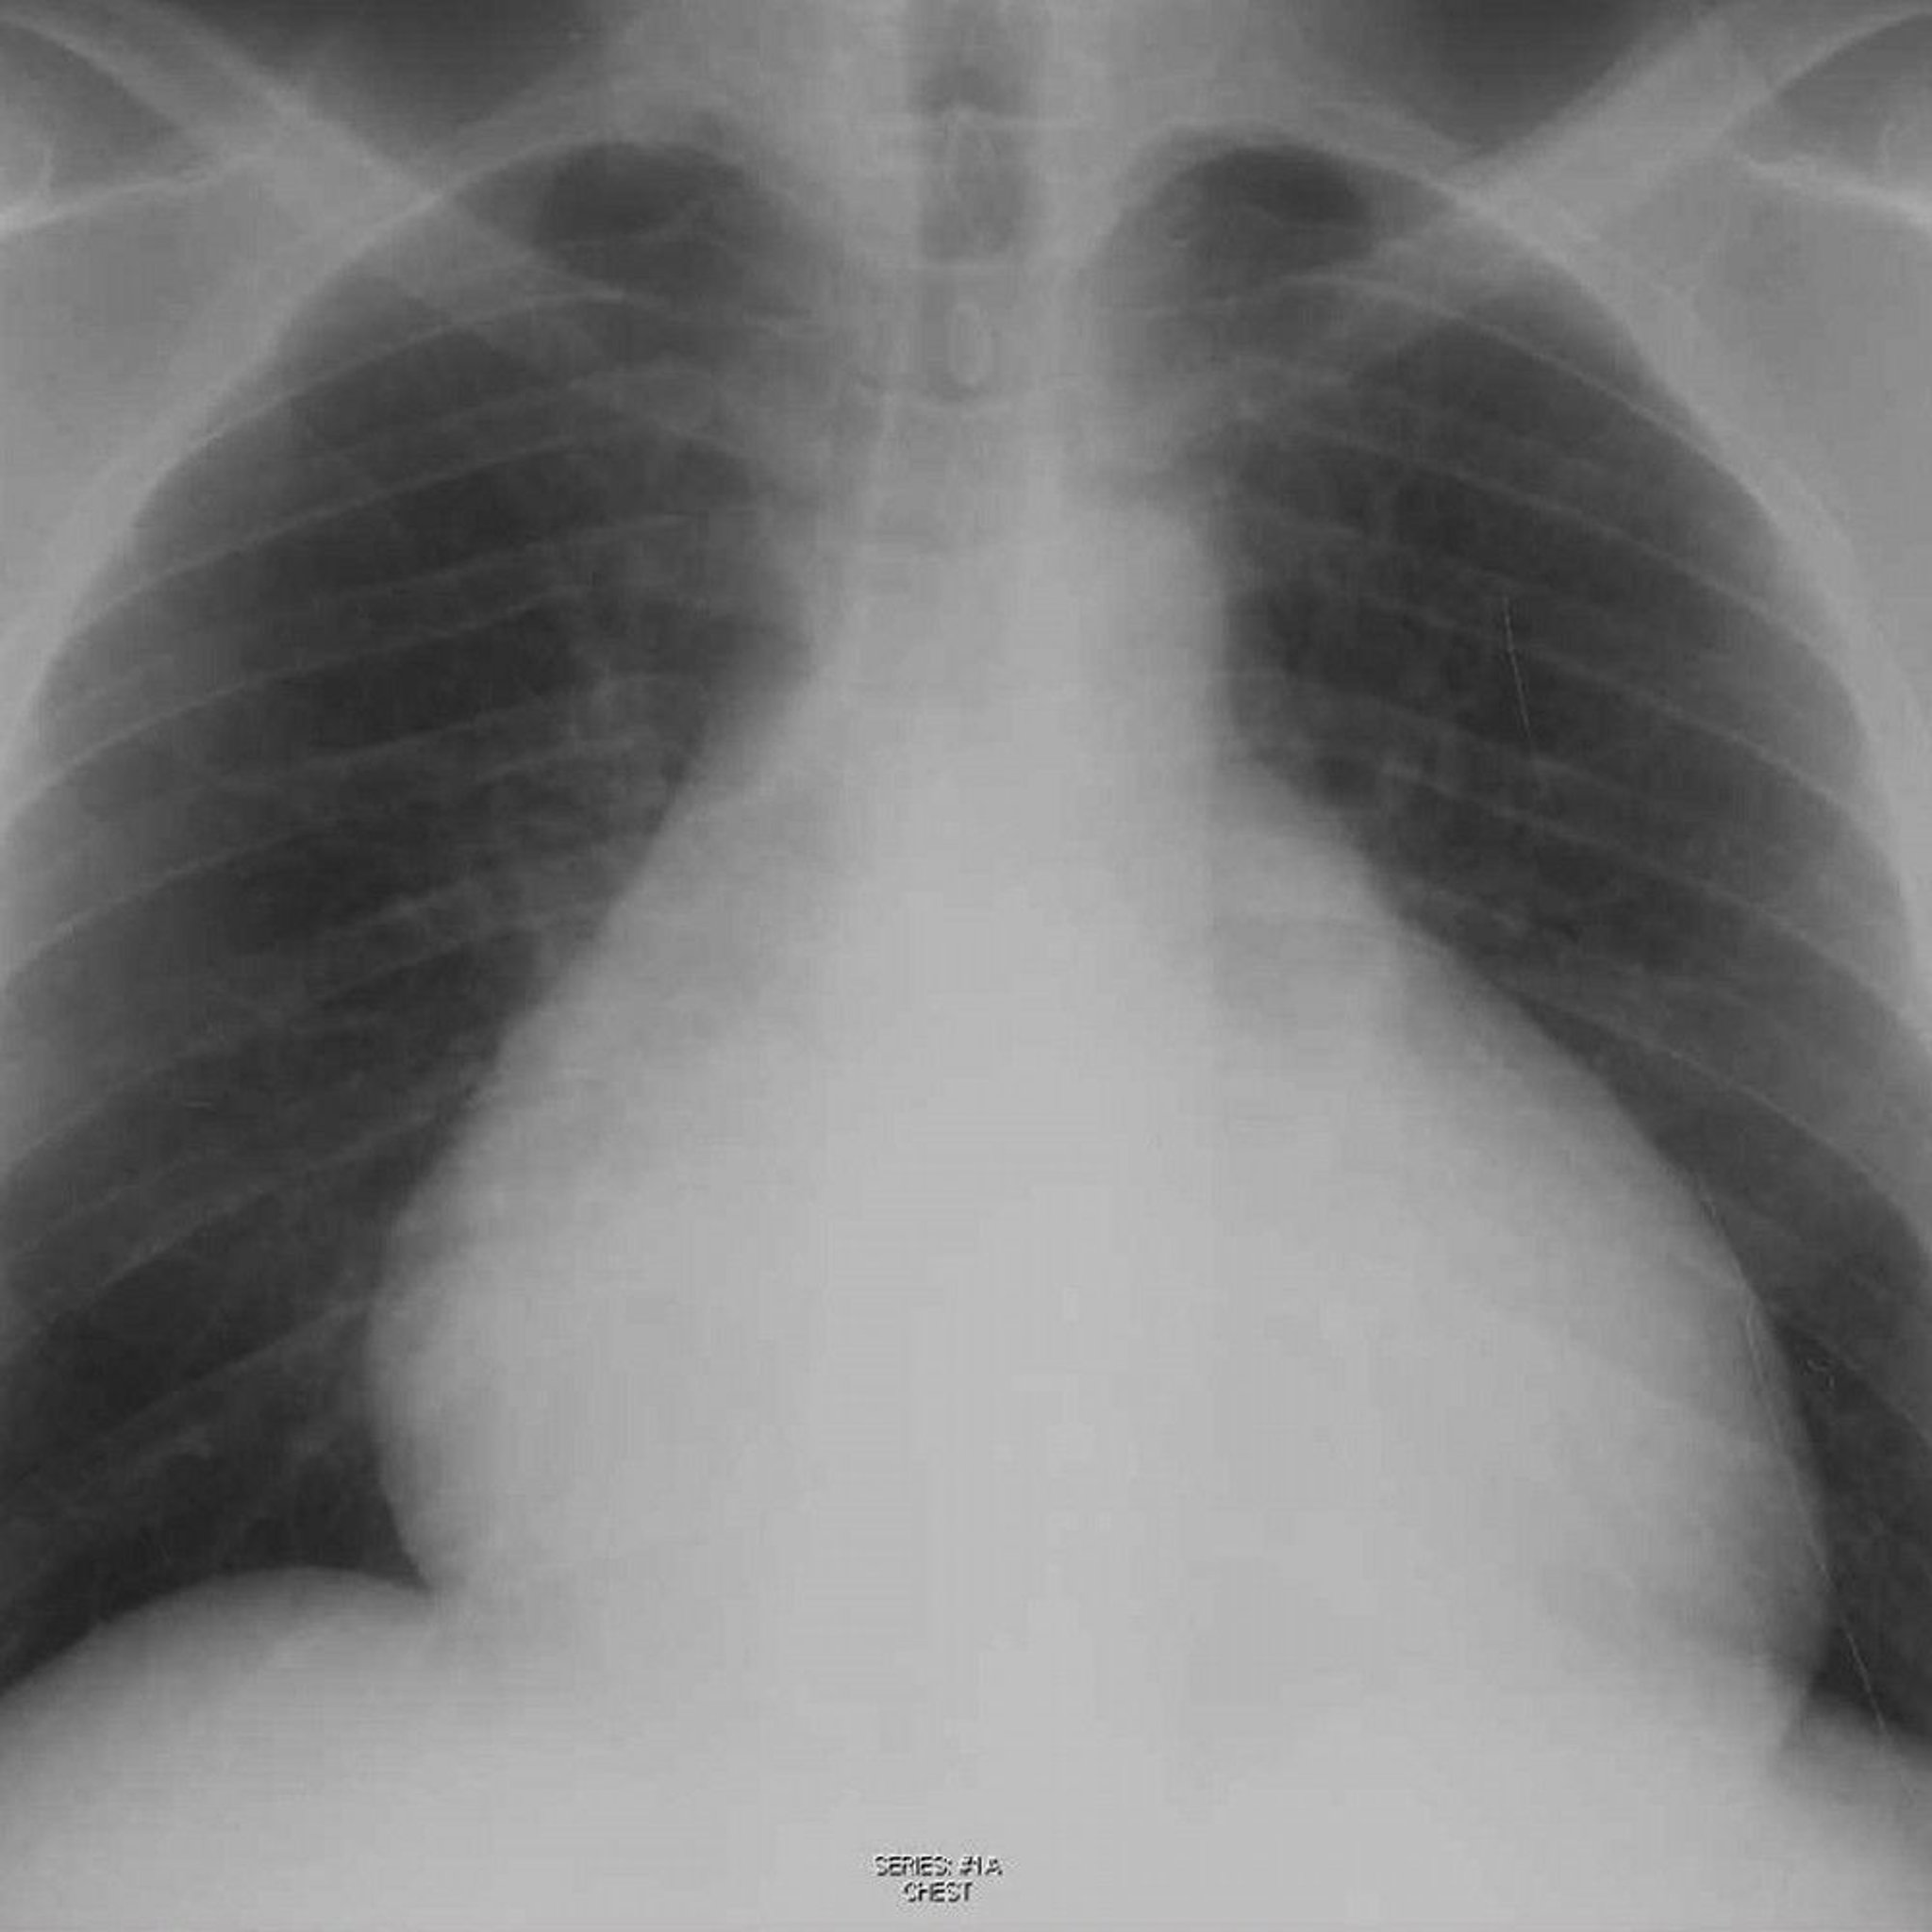 Chest X-Ray of a Patient with Pericardial Effusion